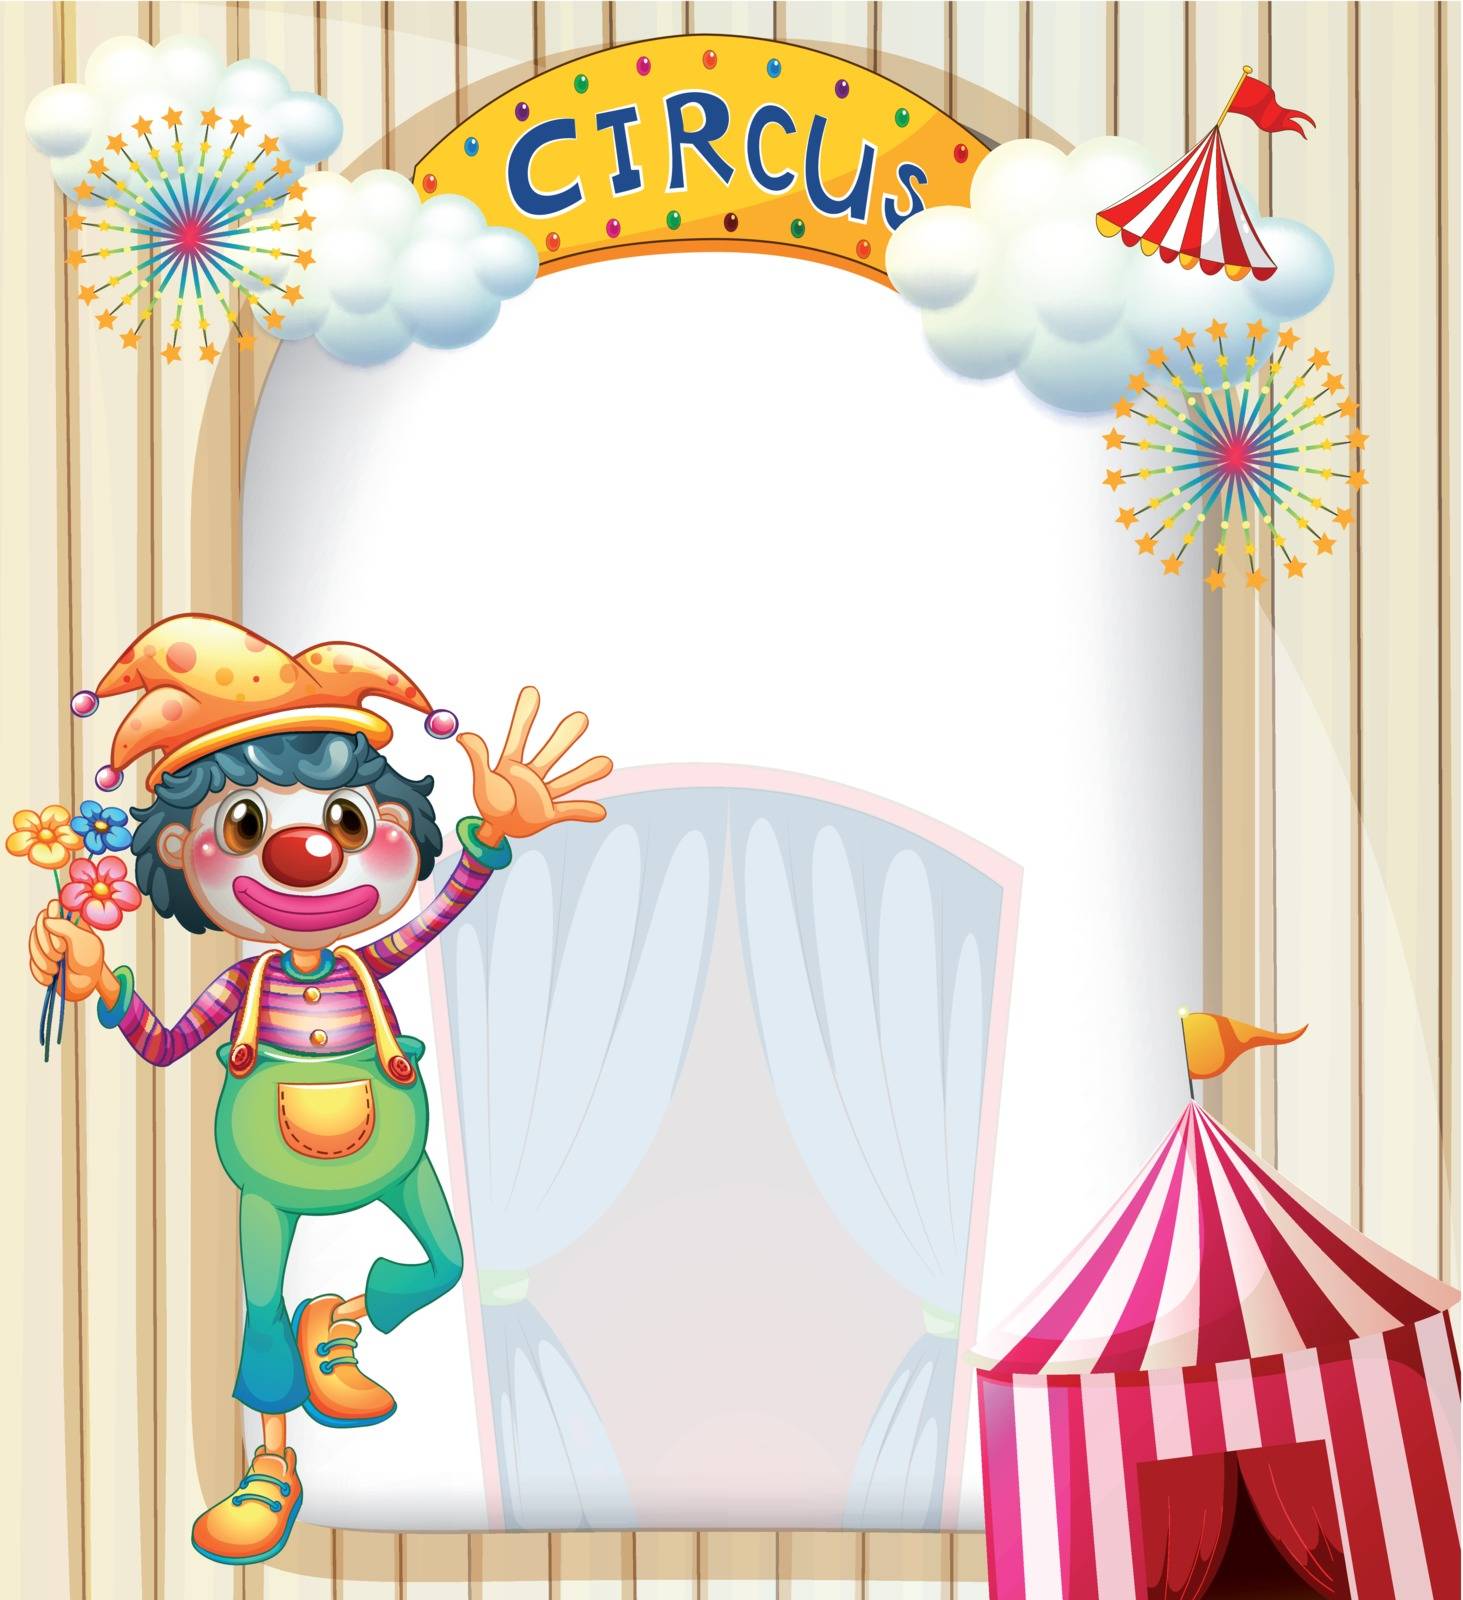 Illustration of a circus entrance with a clown